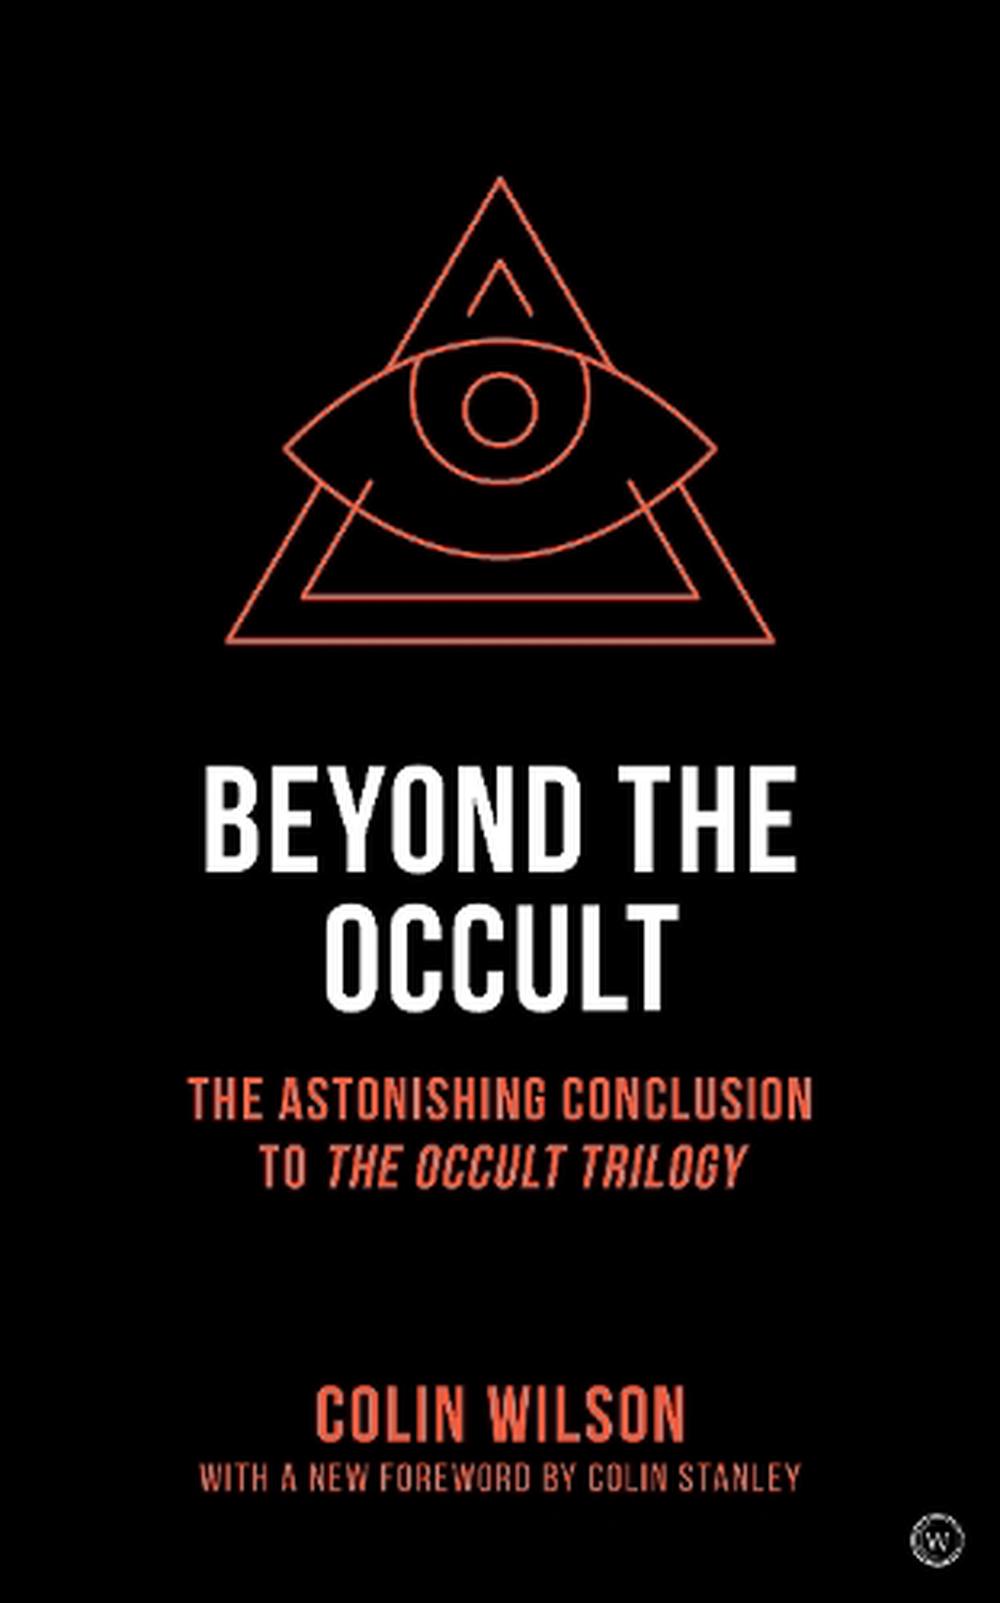 the occult by colin wilson